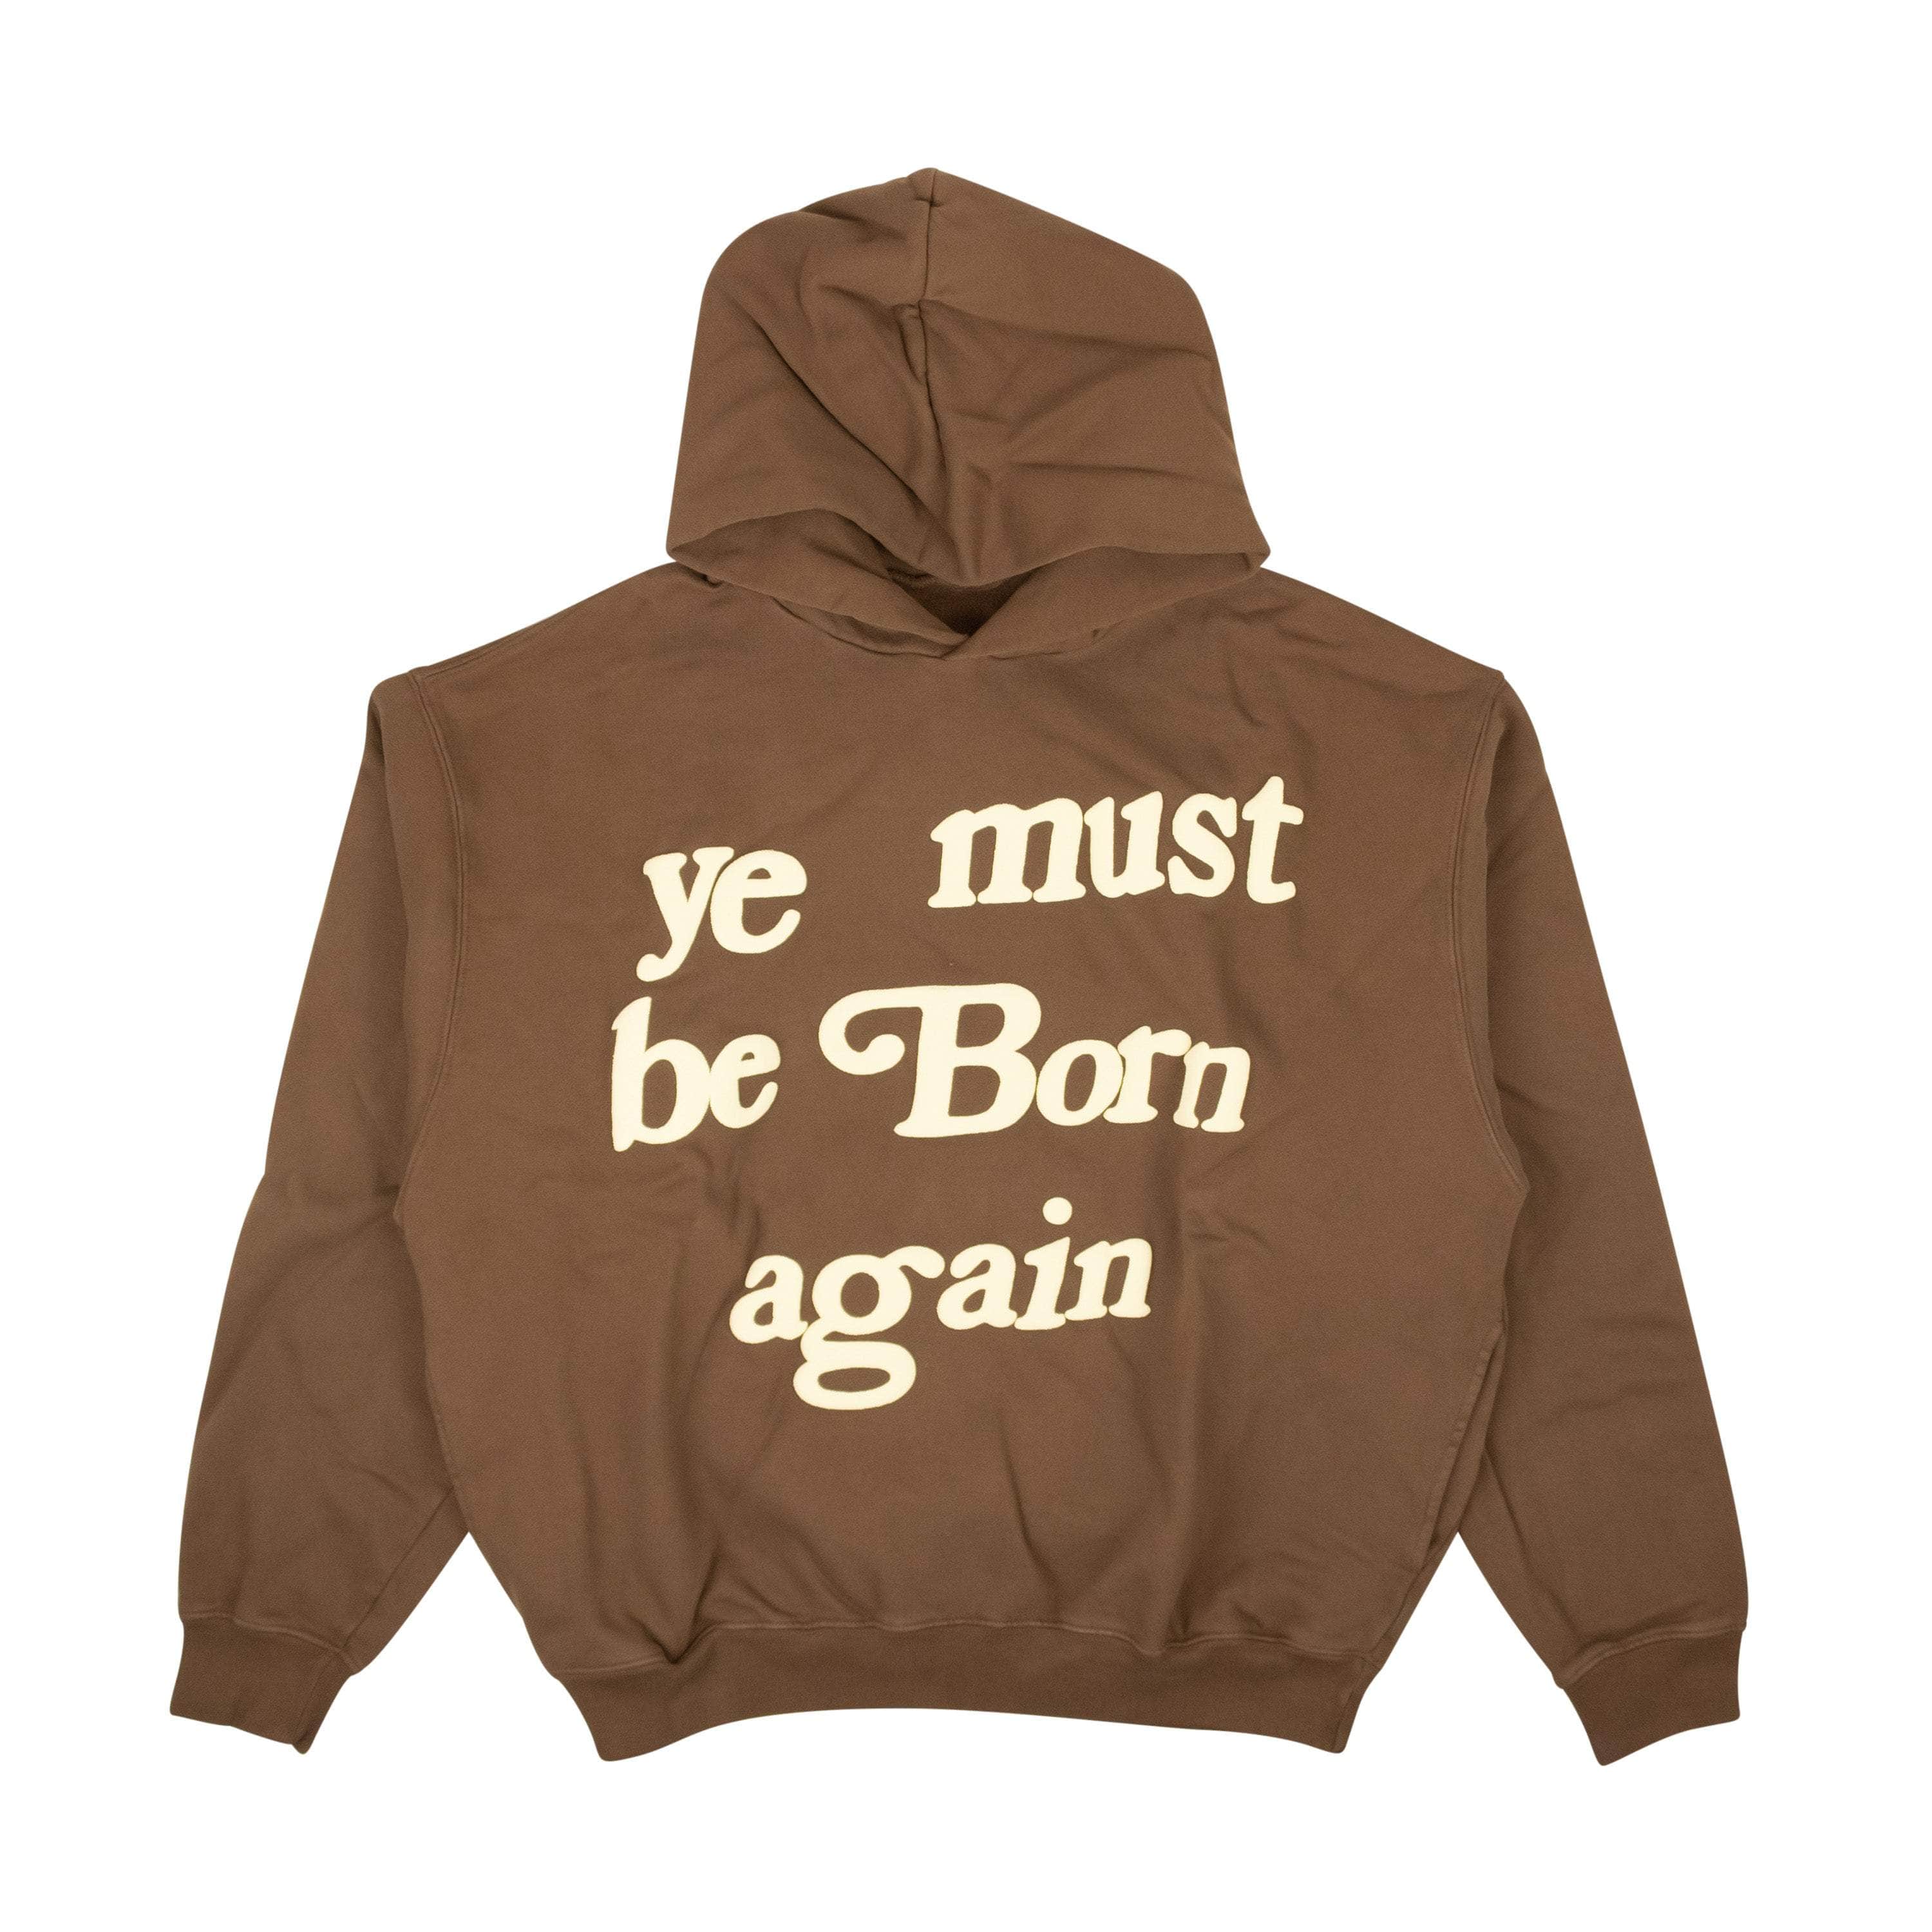 Cactus Plant Flea Market 250-500, cactus-plant-flea-market, couponcollection, gender-mens, gexclude, main-clothing, mens-shoes, size-l, size-m, size-s, SPO Brown Cactus Plant Flea Market Ye Must Be Born Again Hoodie